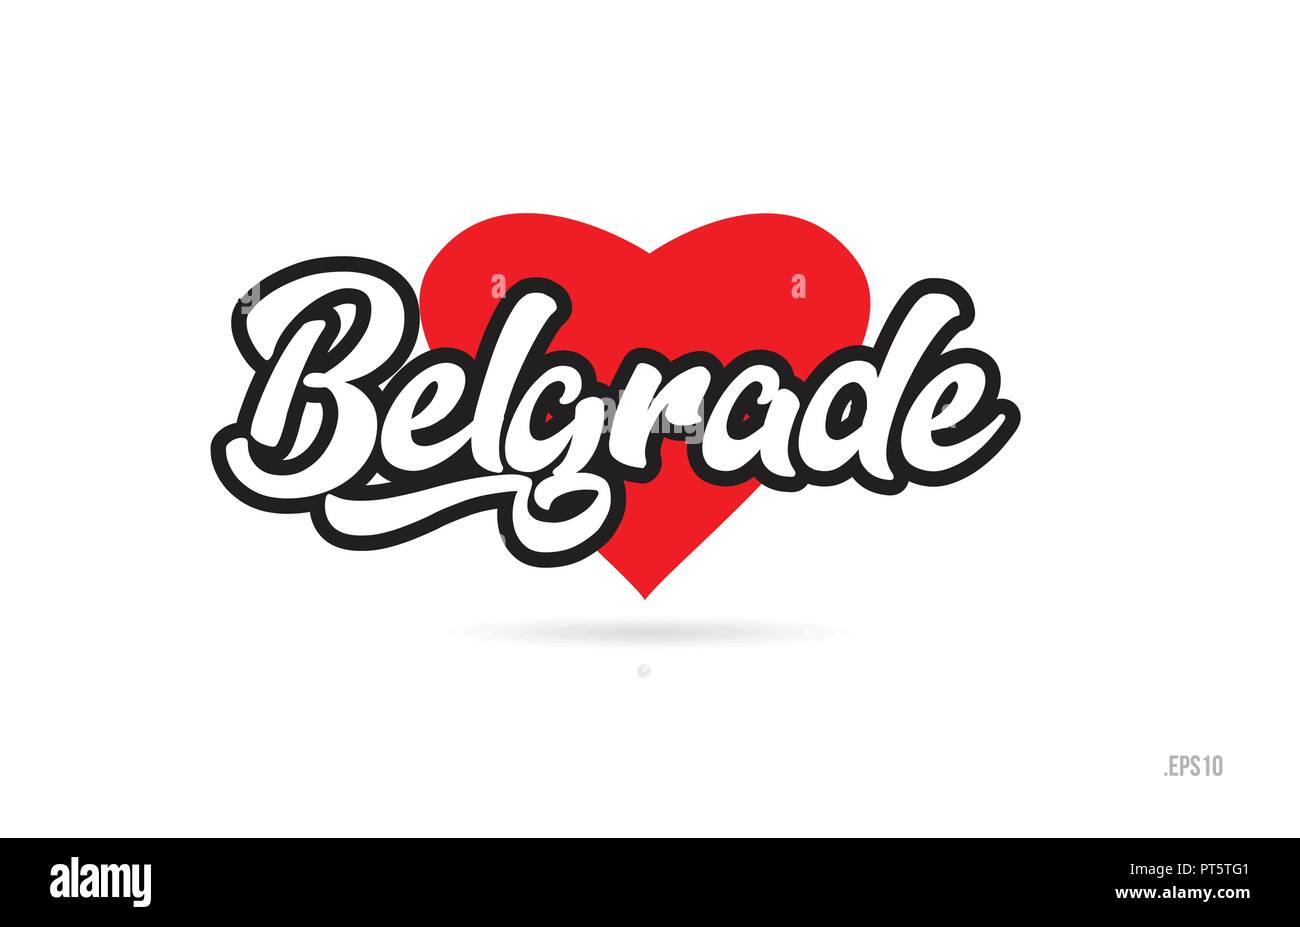 belgrade city text design with red heart typographic icon design suitable for touristic promotion Stock Vector